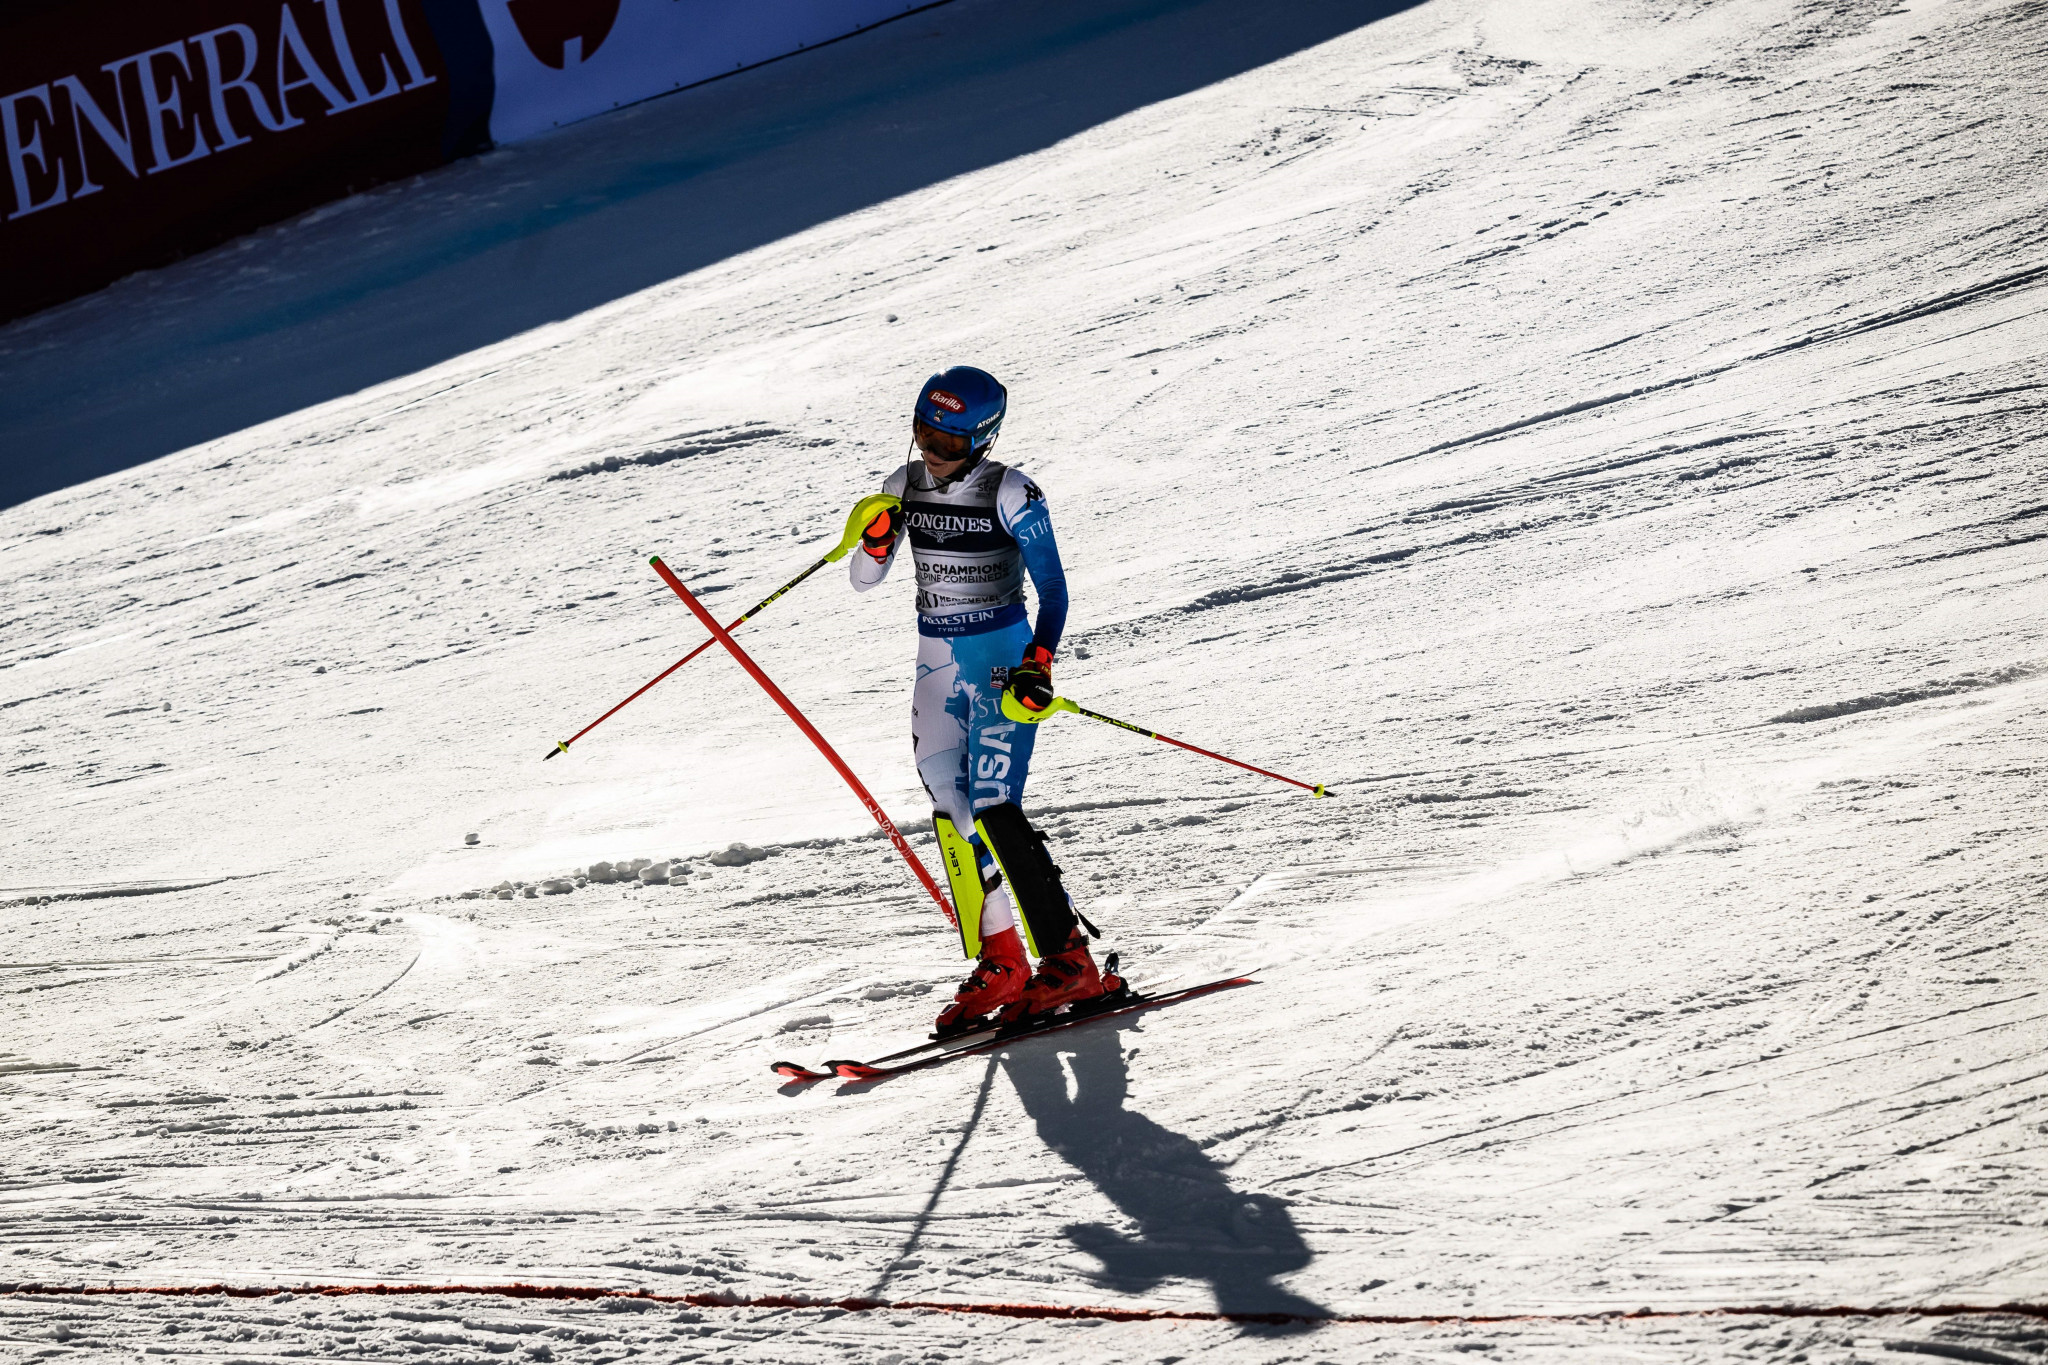 Mikaela Shiffrin of the United States failed to defend her title after missing a gate in the second run of the Alpine combined ©Getty Images